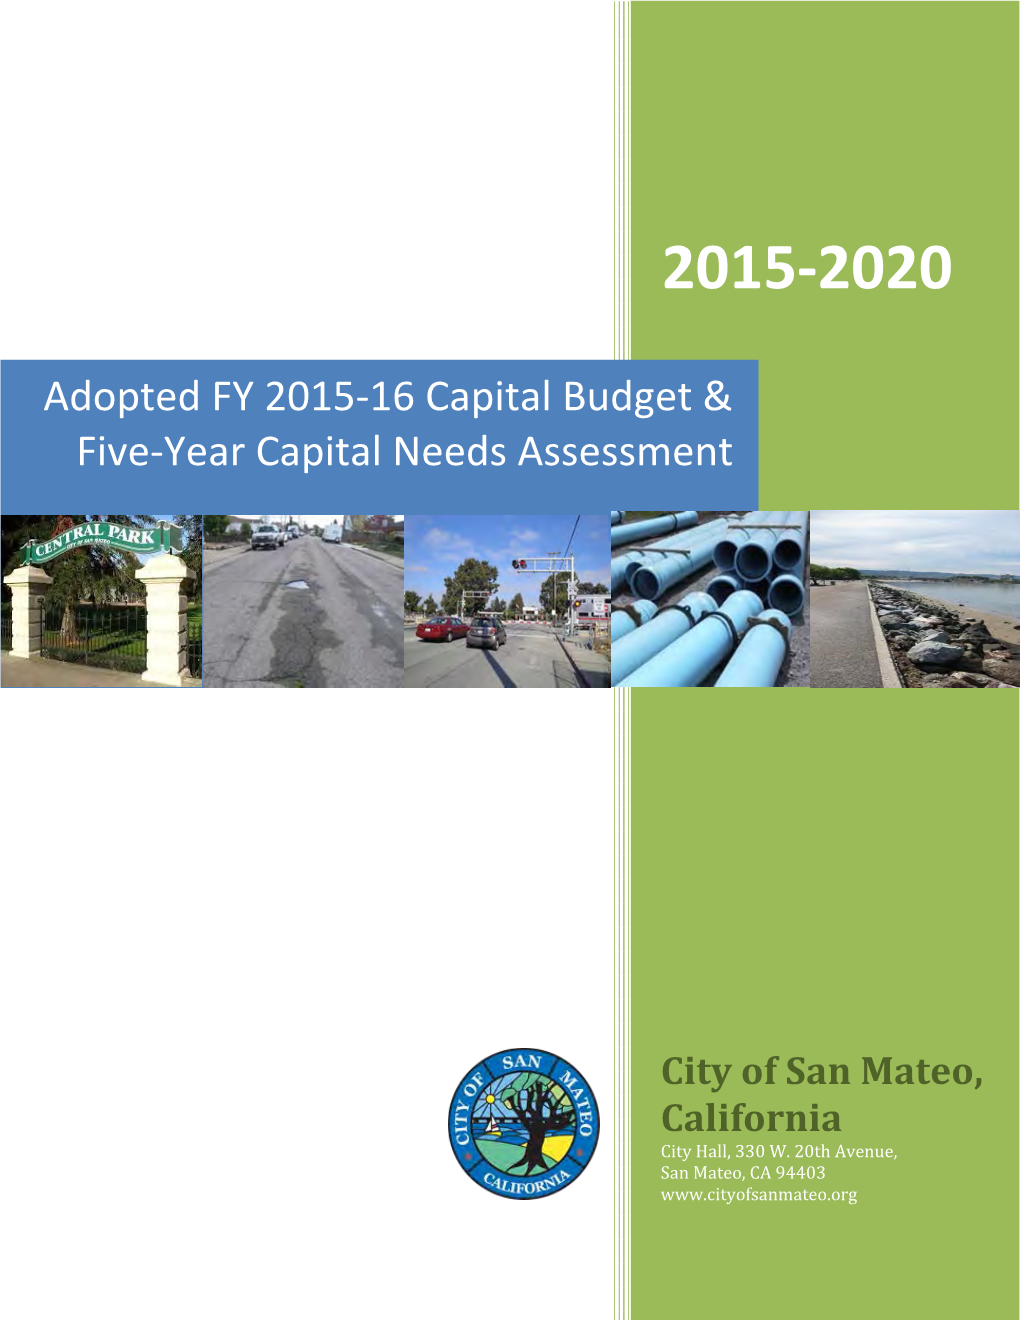 Adopted 2015-16 Capital Budget & Five-Year Capital Needs Assessment